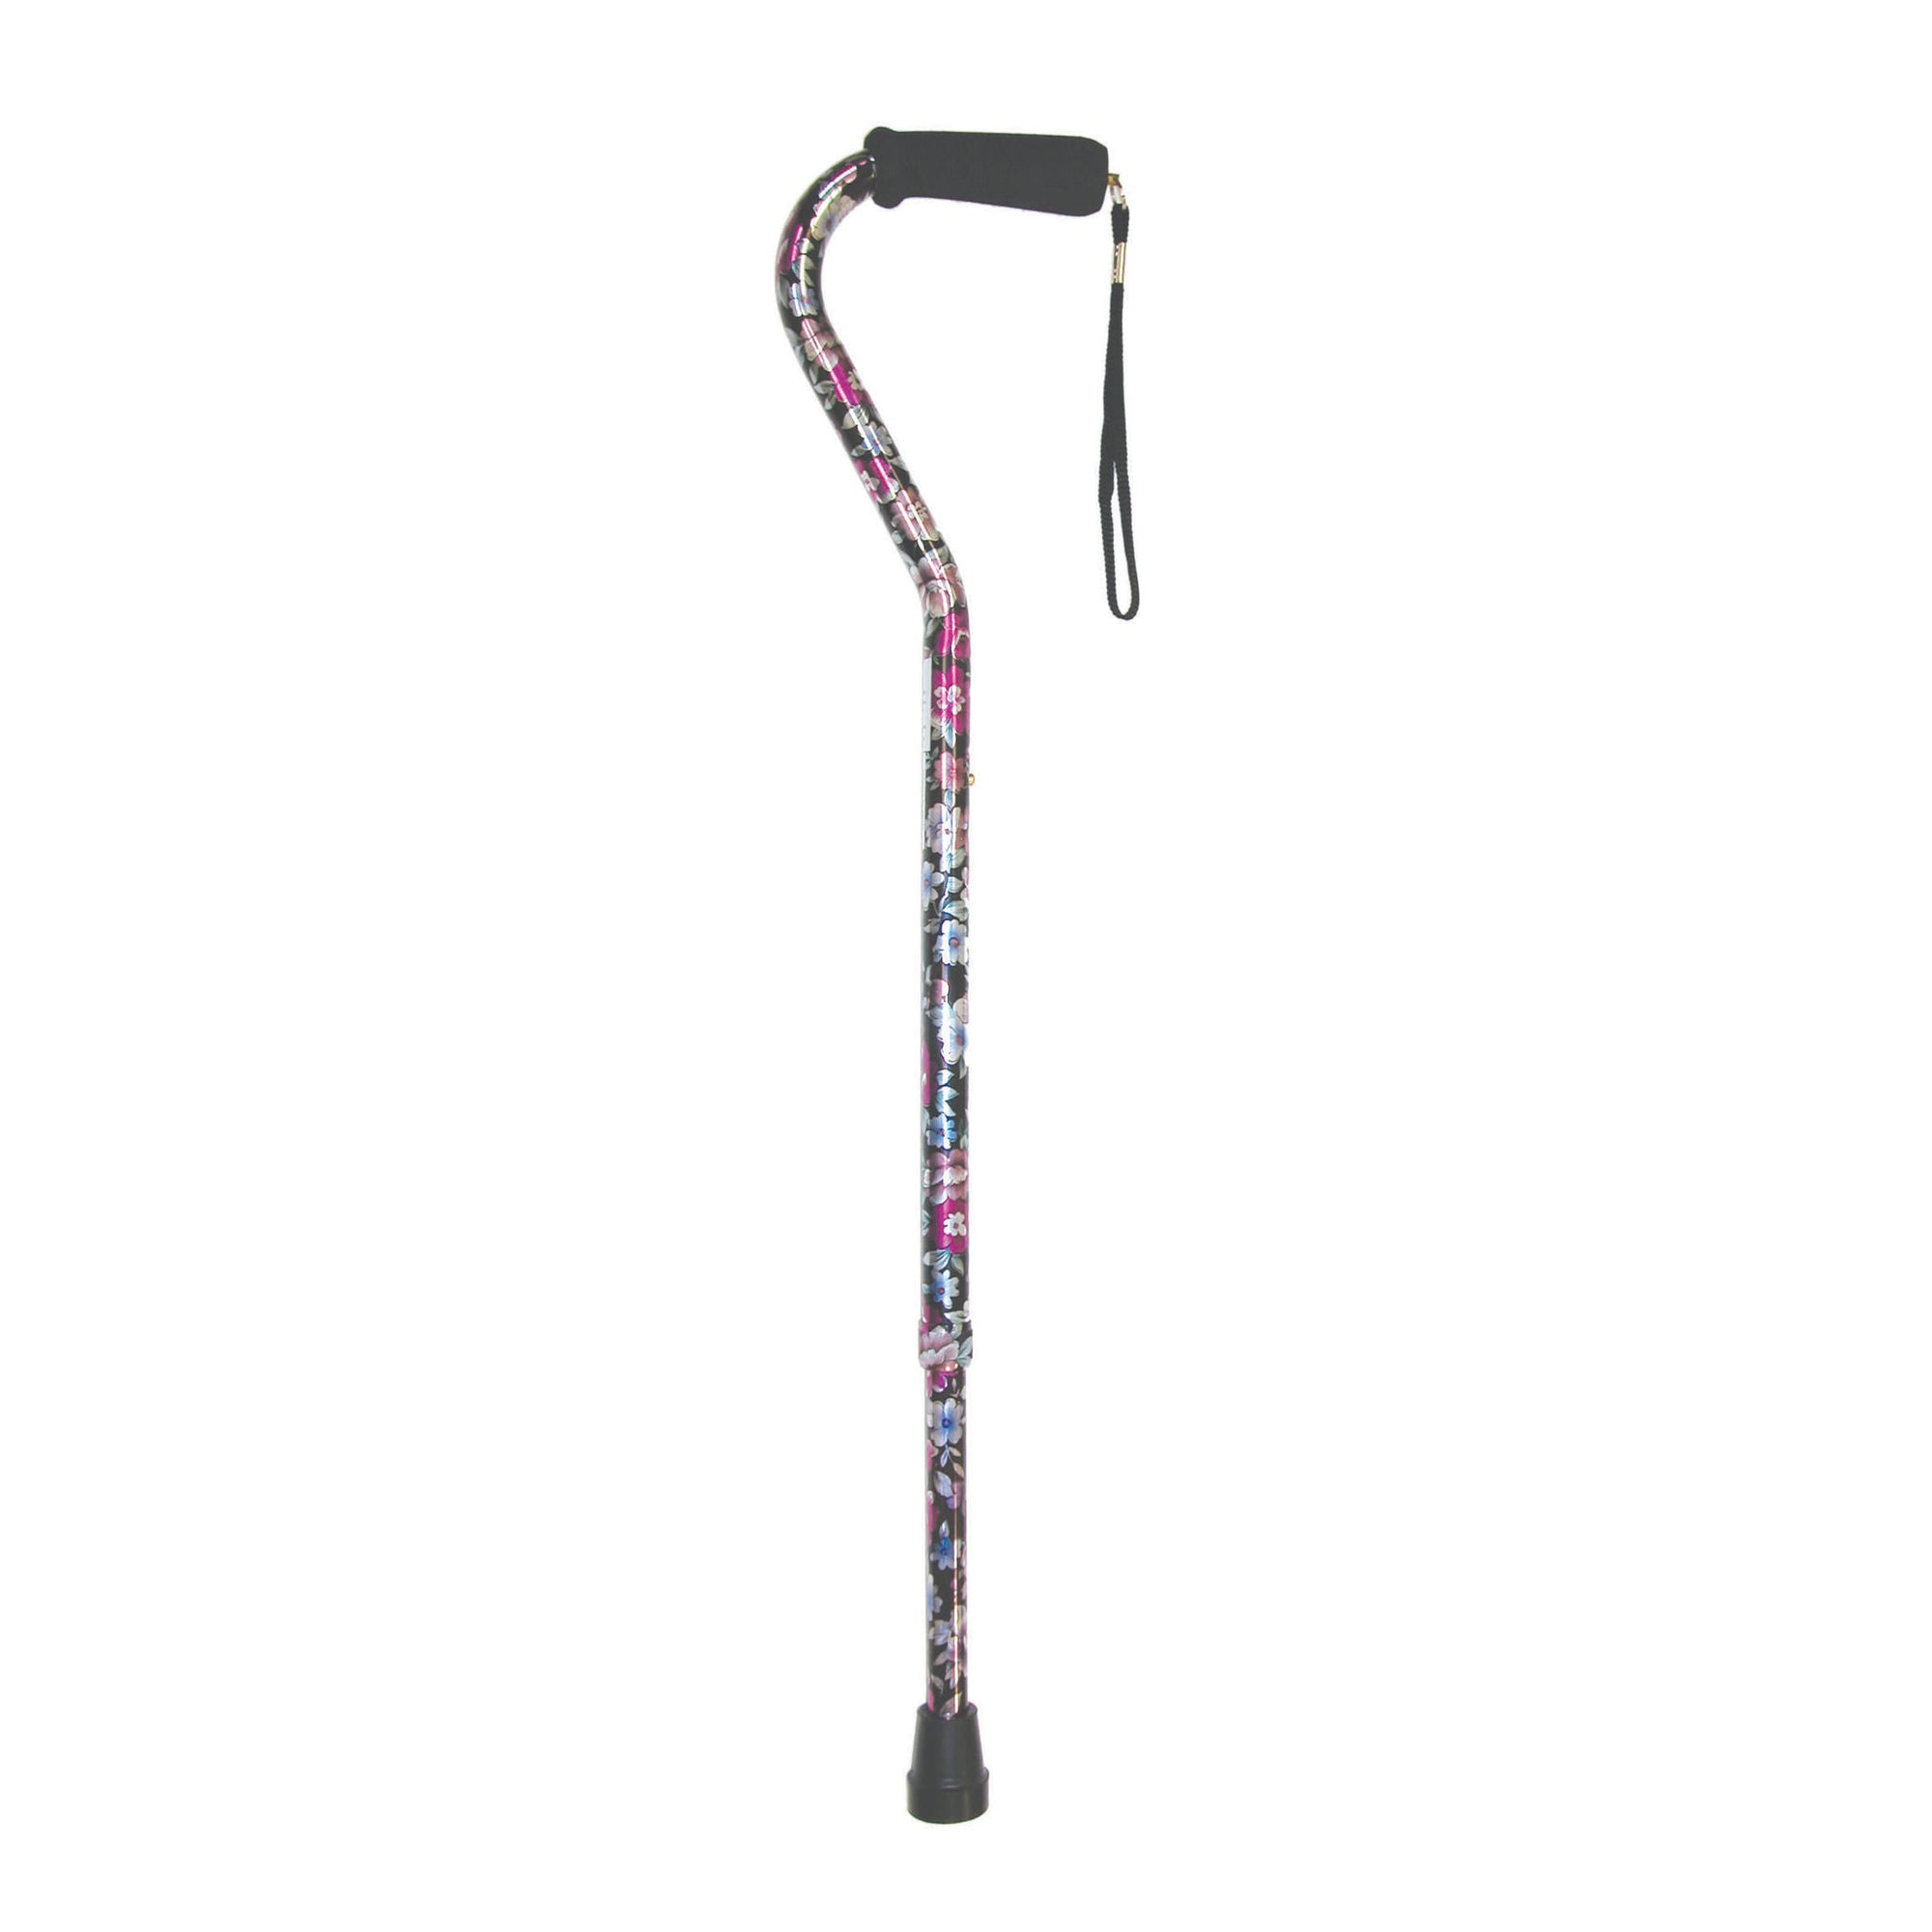 Mabis Deluxe Adjustable Offset Cane-Black